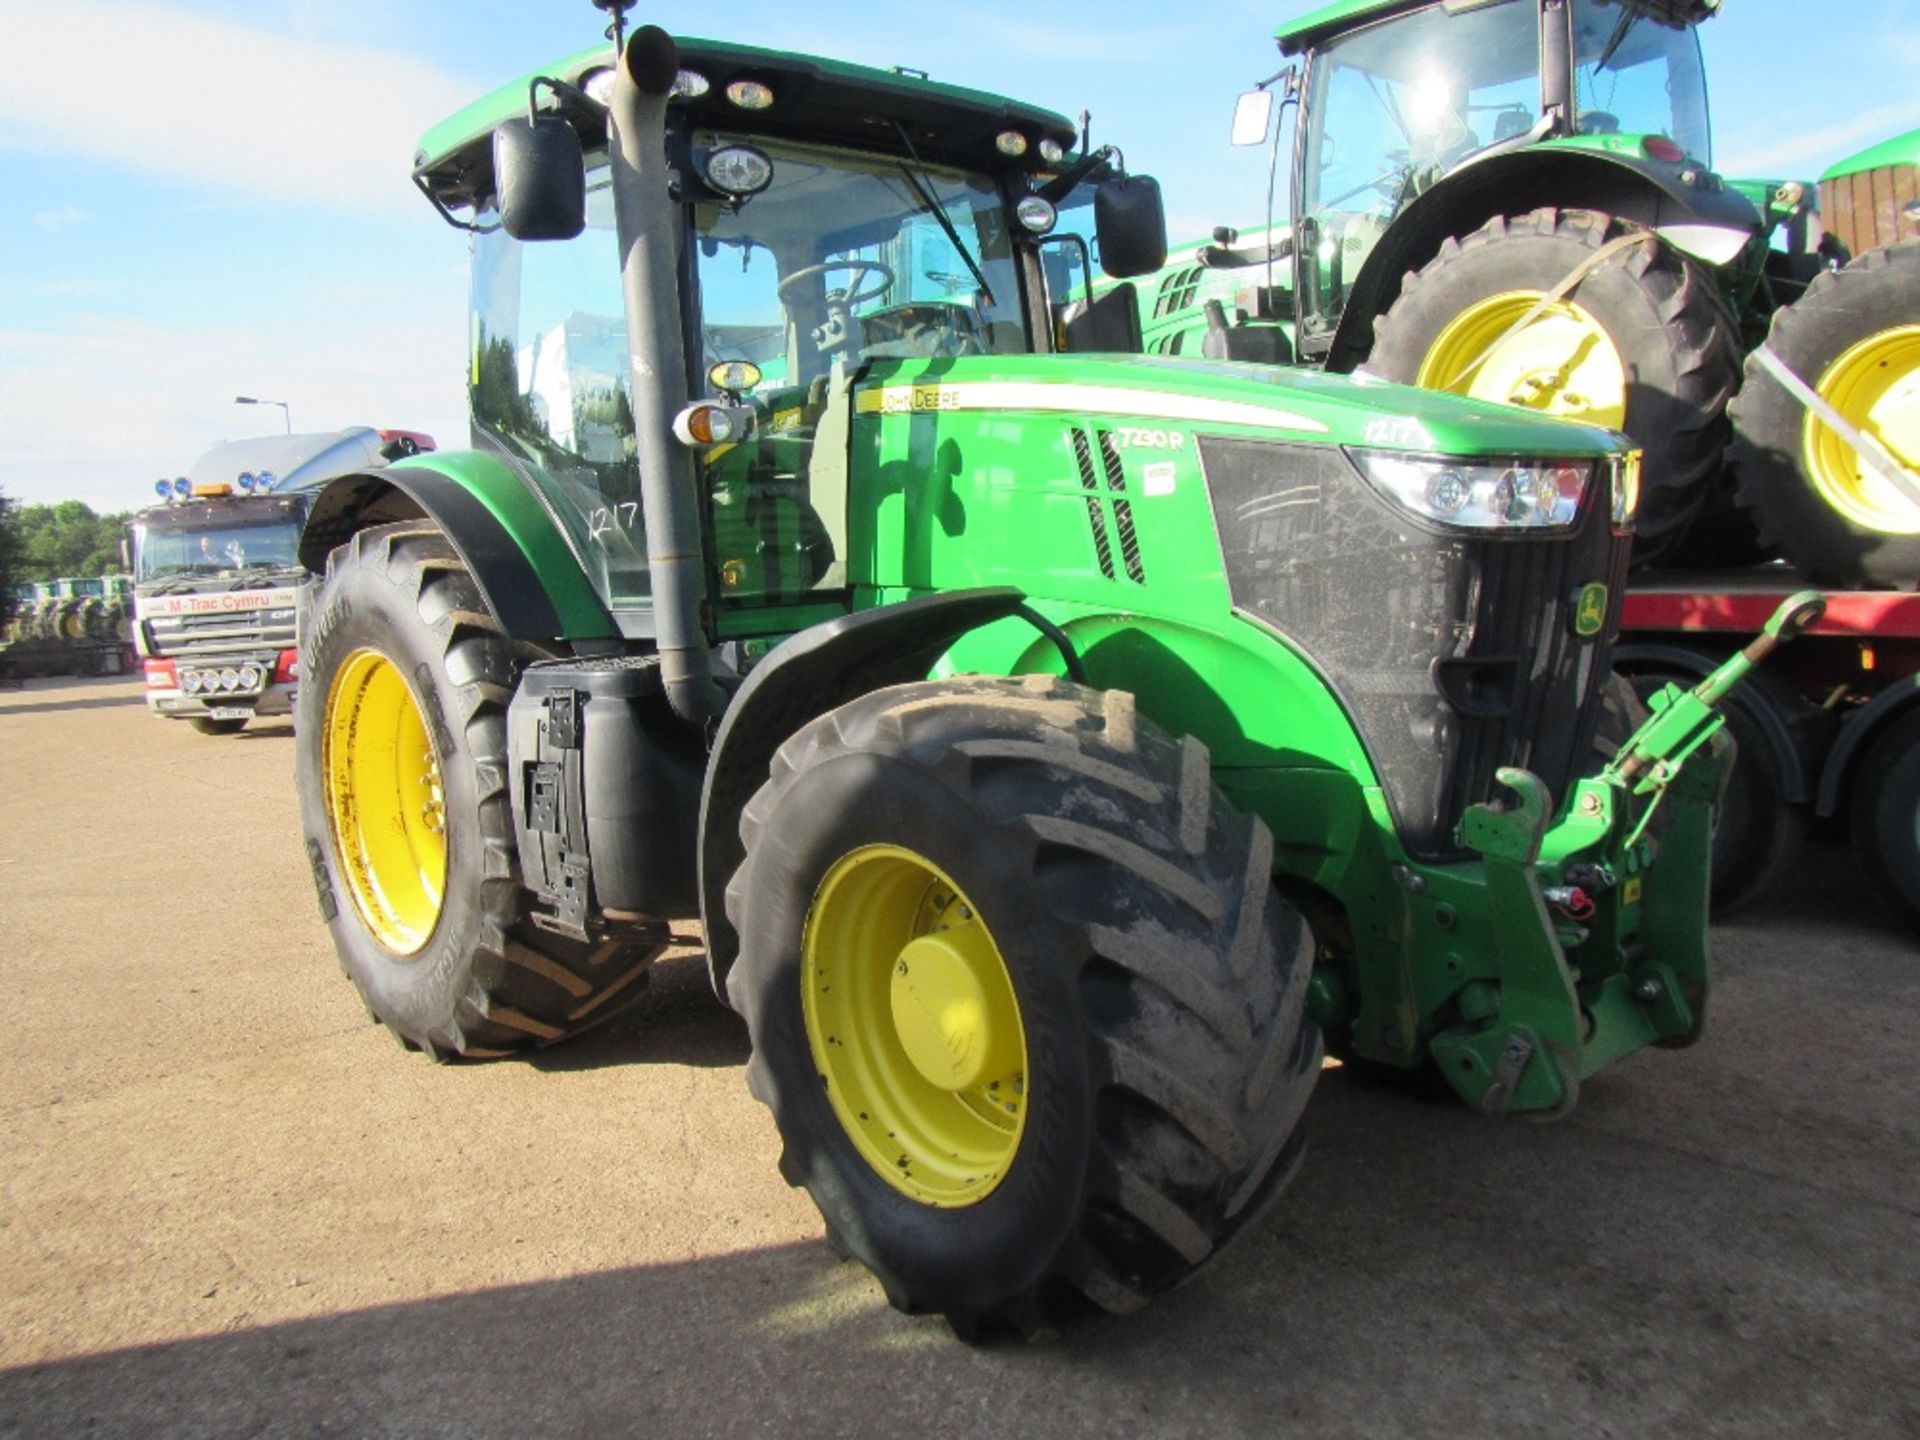 2012 John Deere 7230R 4wd Tractor c/w Auto Power, 50kph, front linkage, front pto - Image 3 of 7